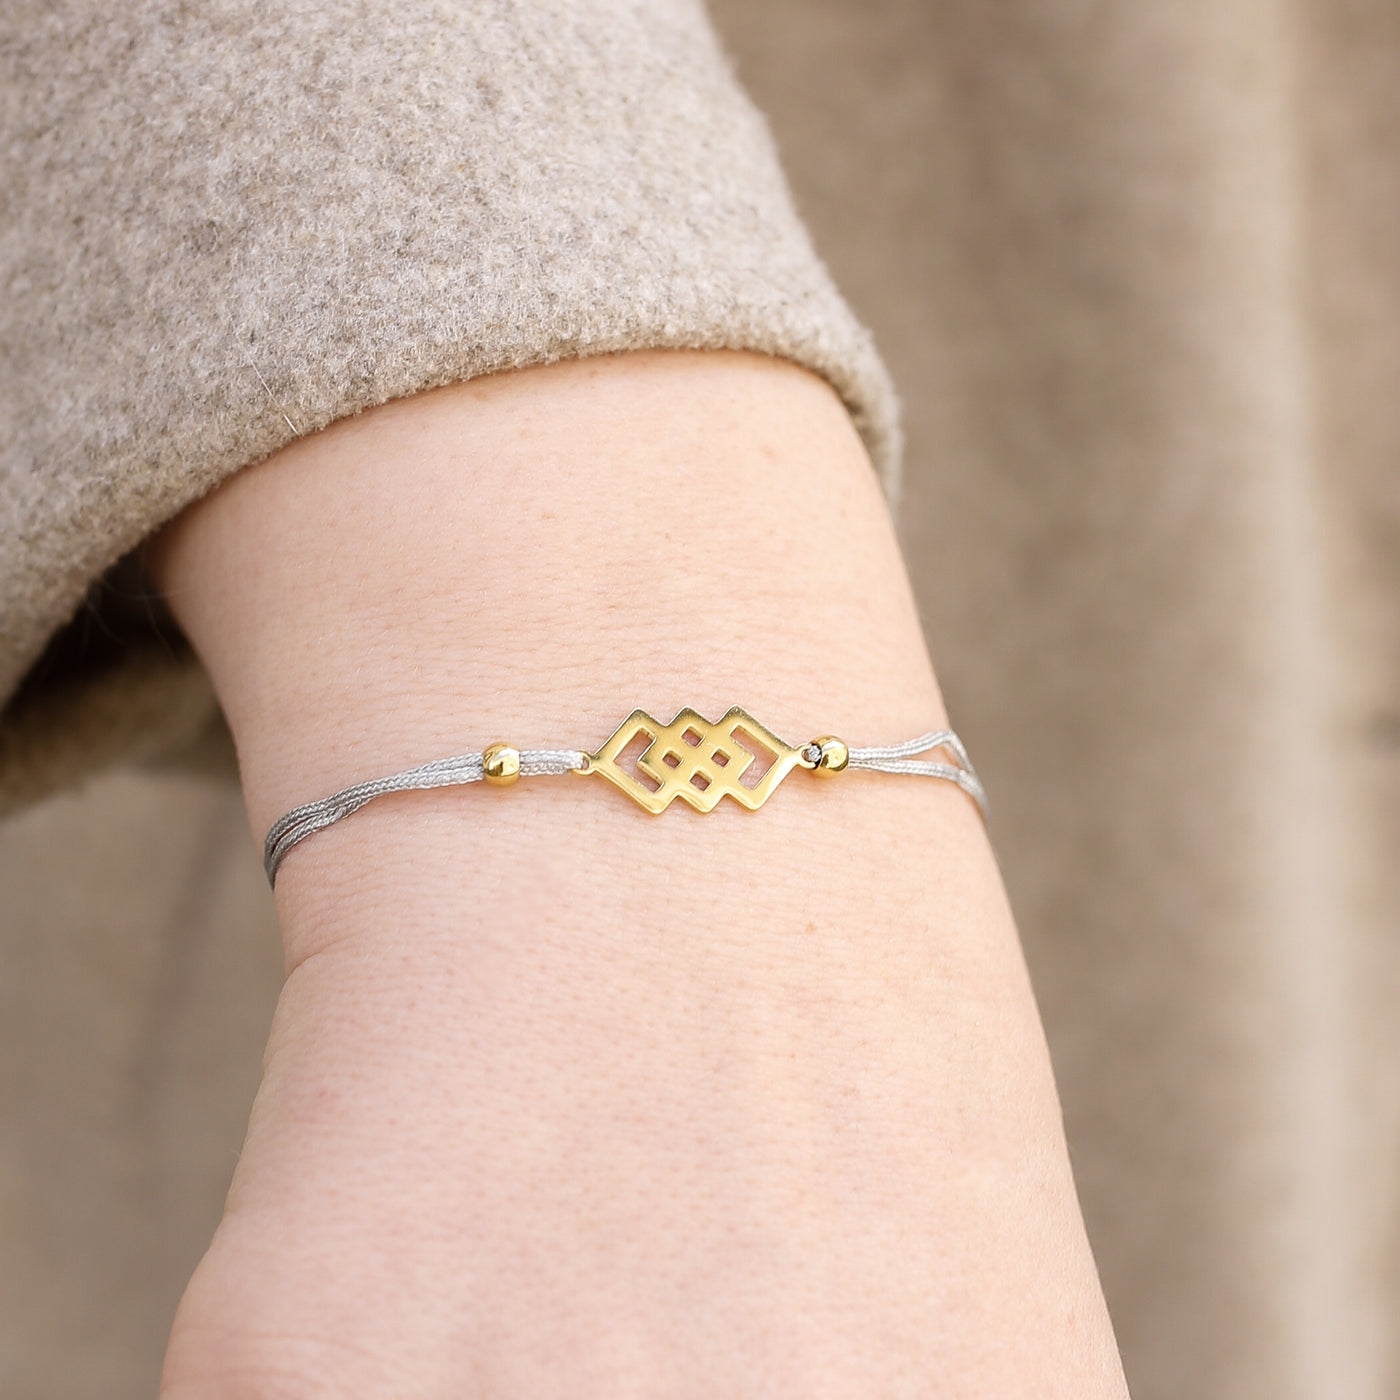 Bracelet with hexagon pendant and Happiness greeting card